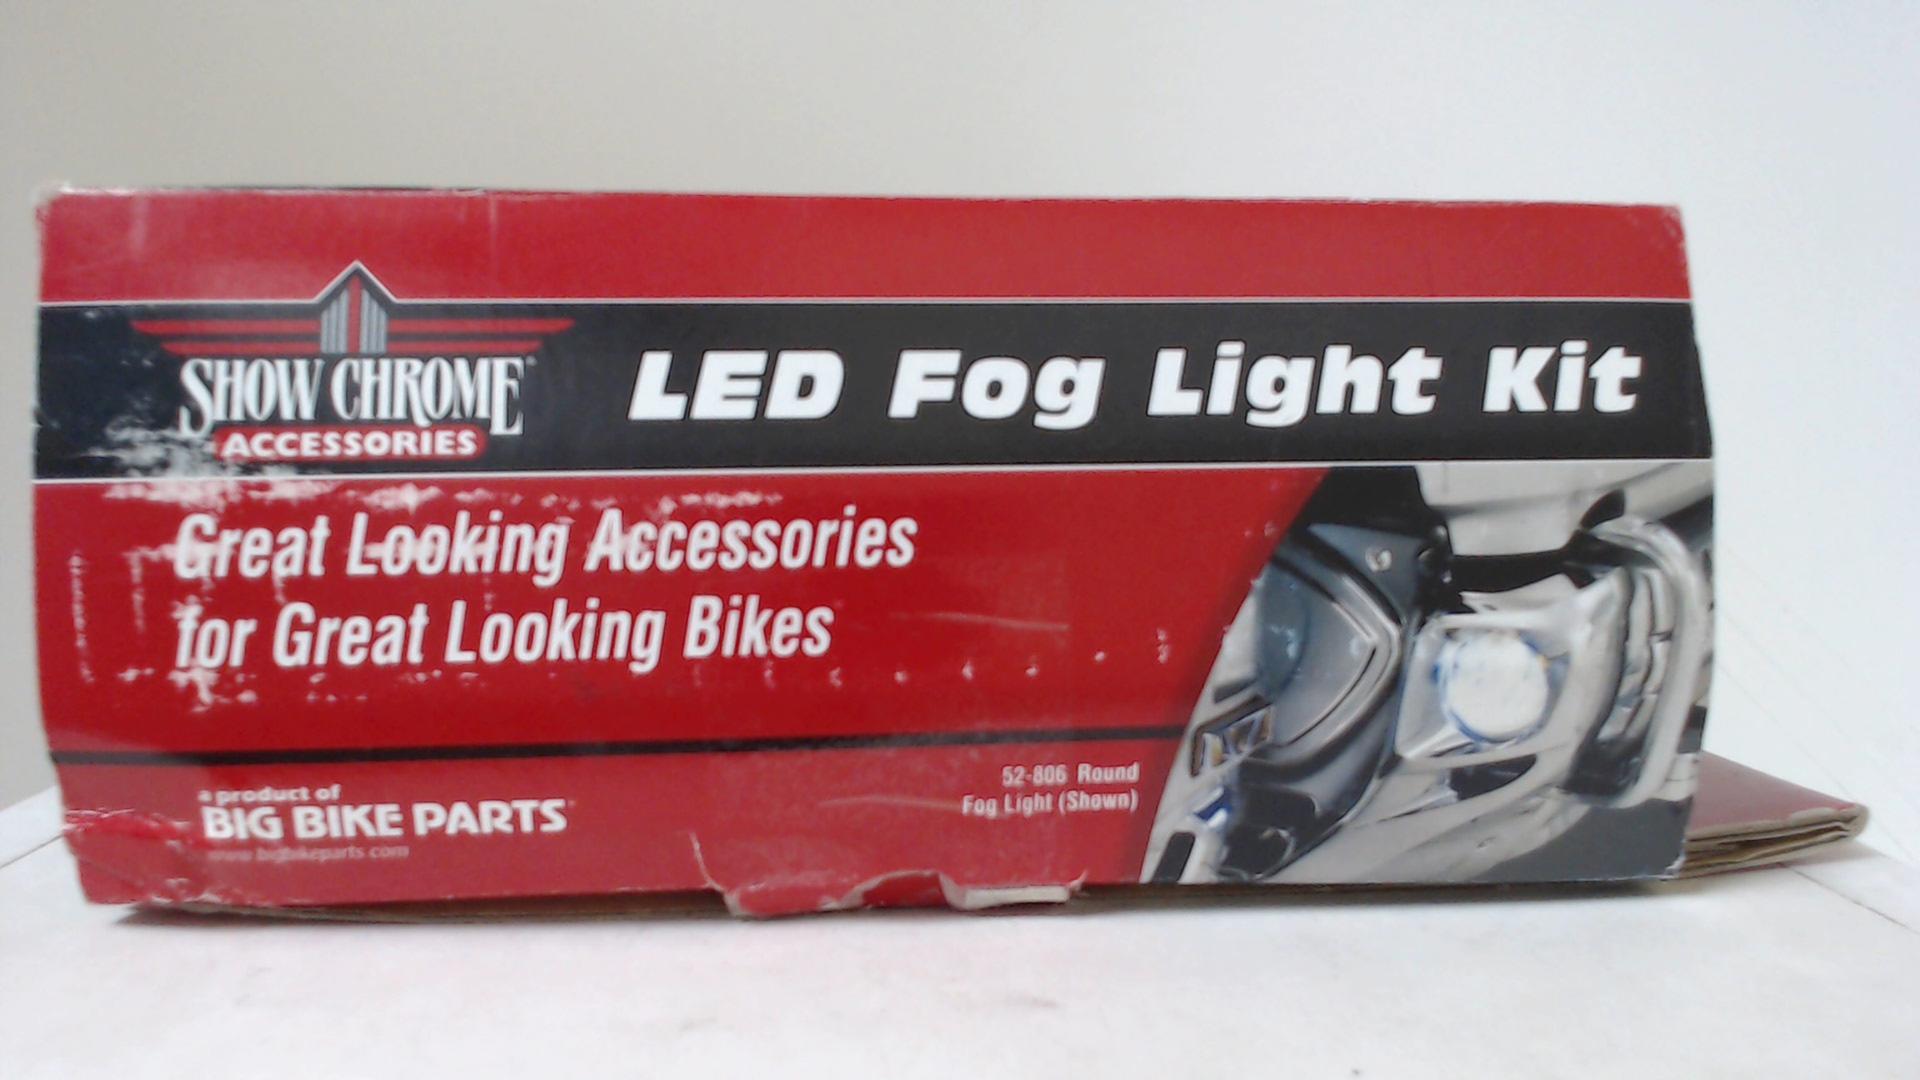 Show Chrome 52 806 Led Fog Light Lower Fits 06 13 Honda Gl1800 Gold Wi Seminole Powersports Your 1 In Fast Fun